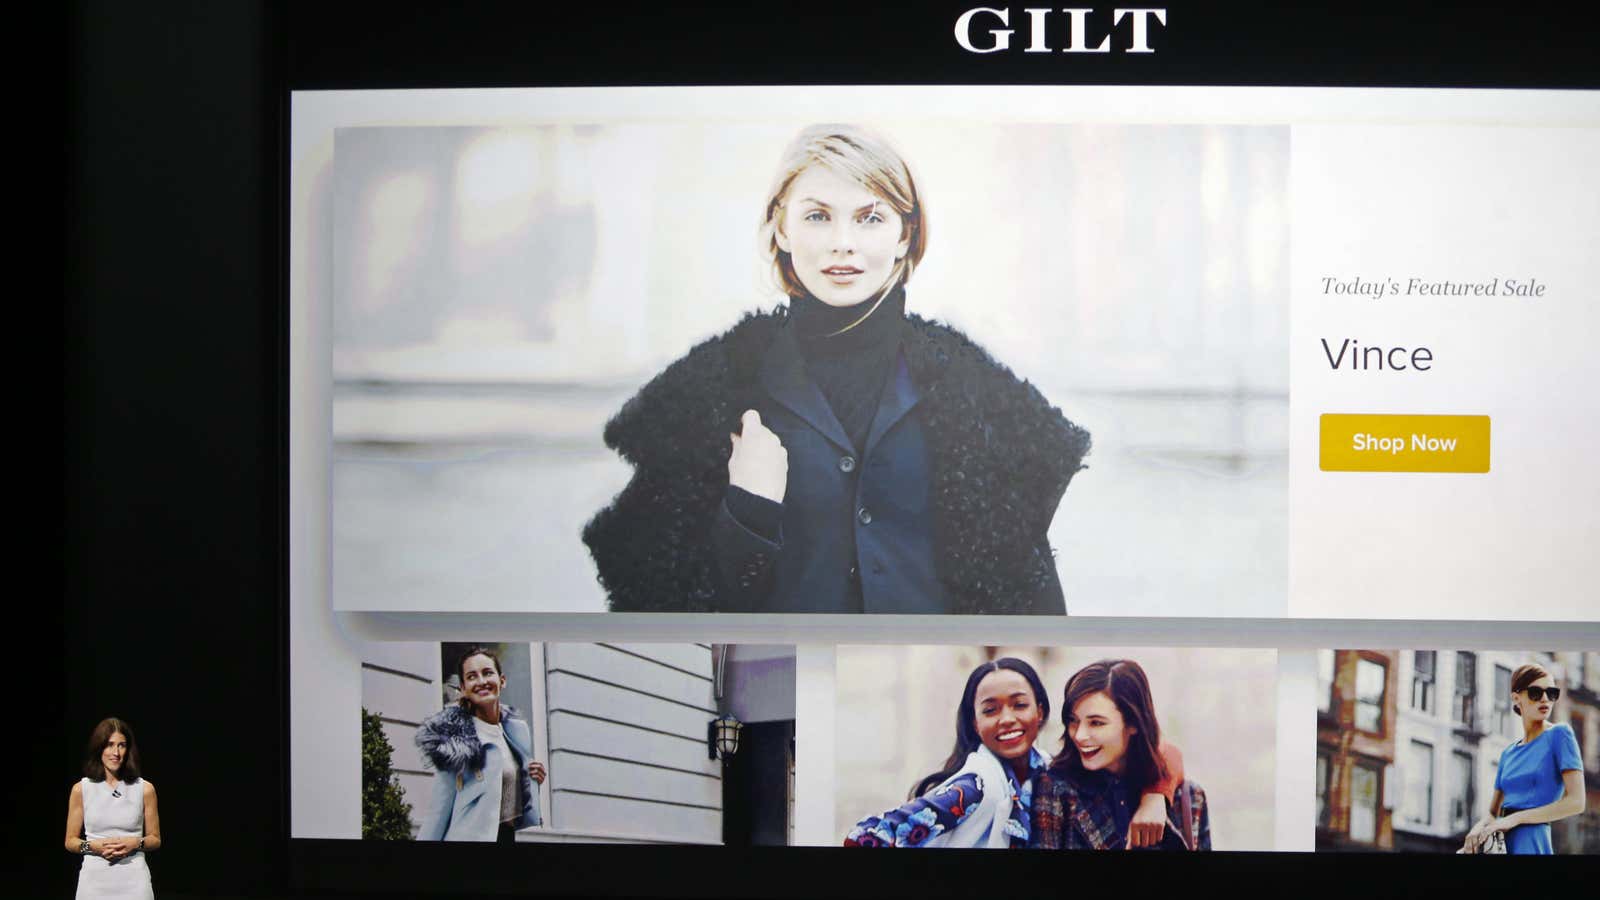 Hudson’s Bay Company is betting Gilt can regain its luster.